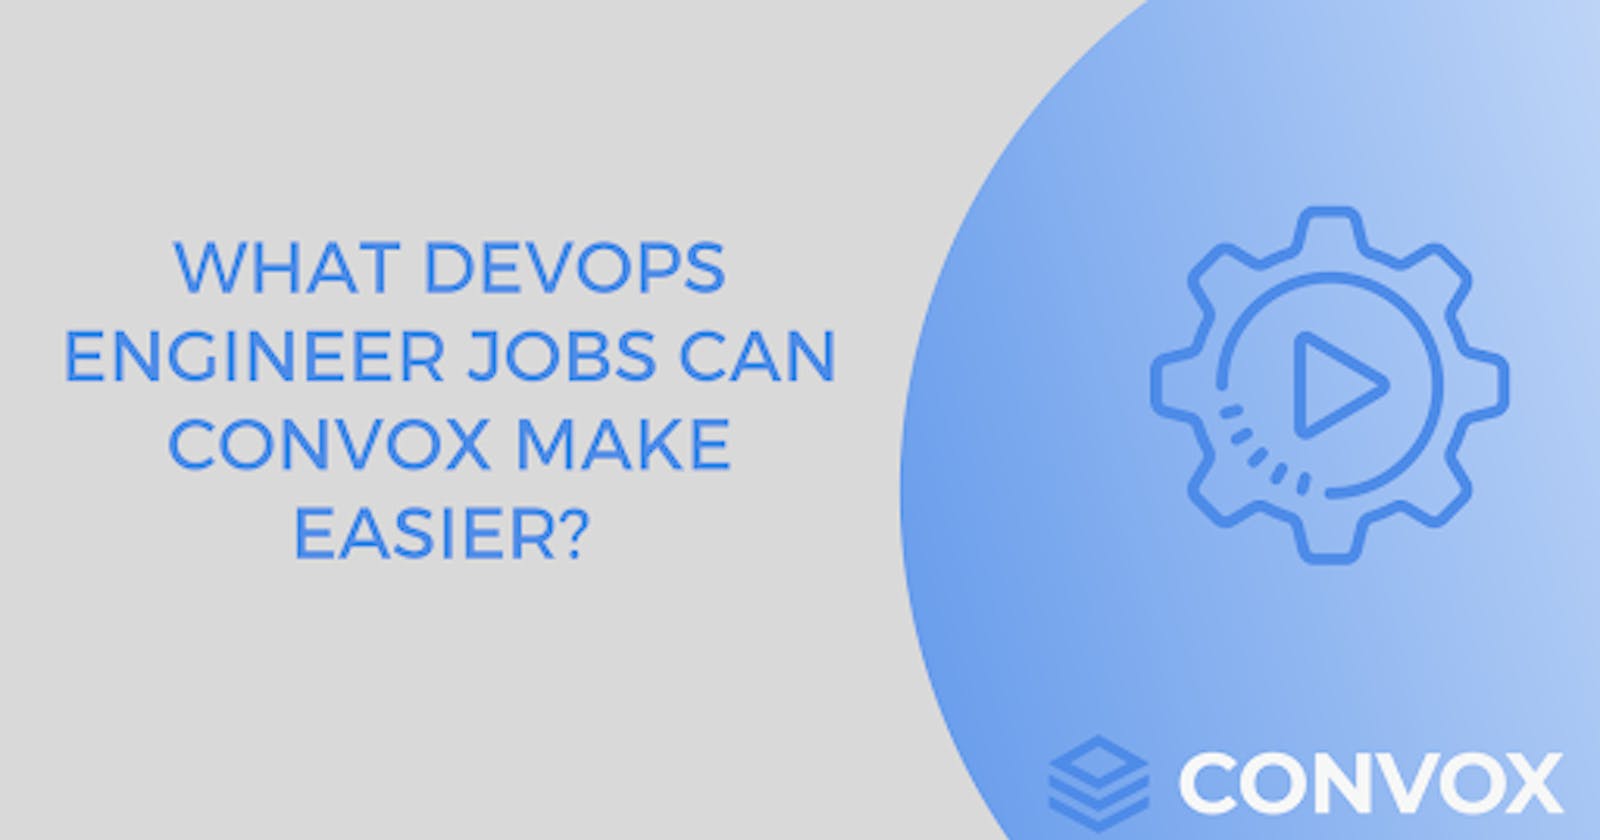 What DevOps engineer jobs does Convox automation make easier?